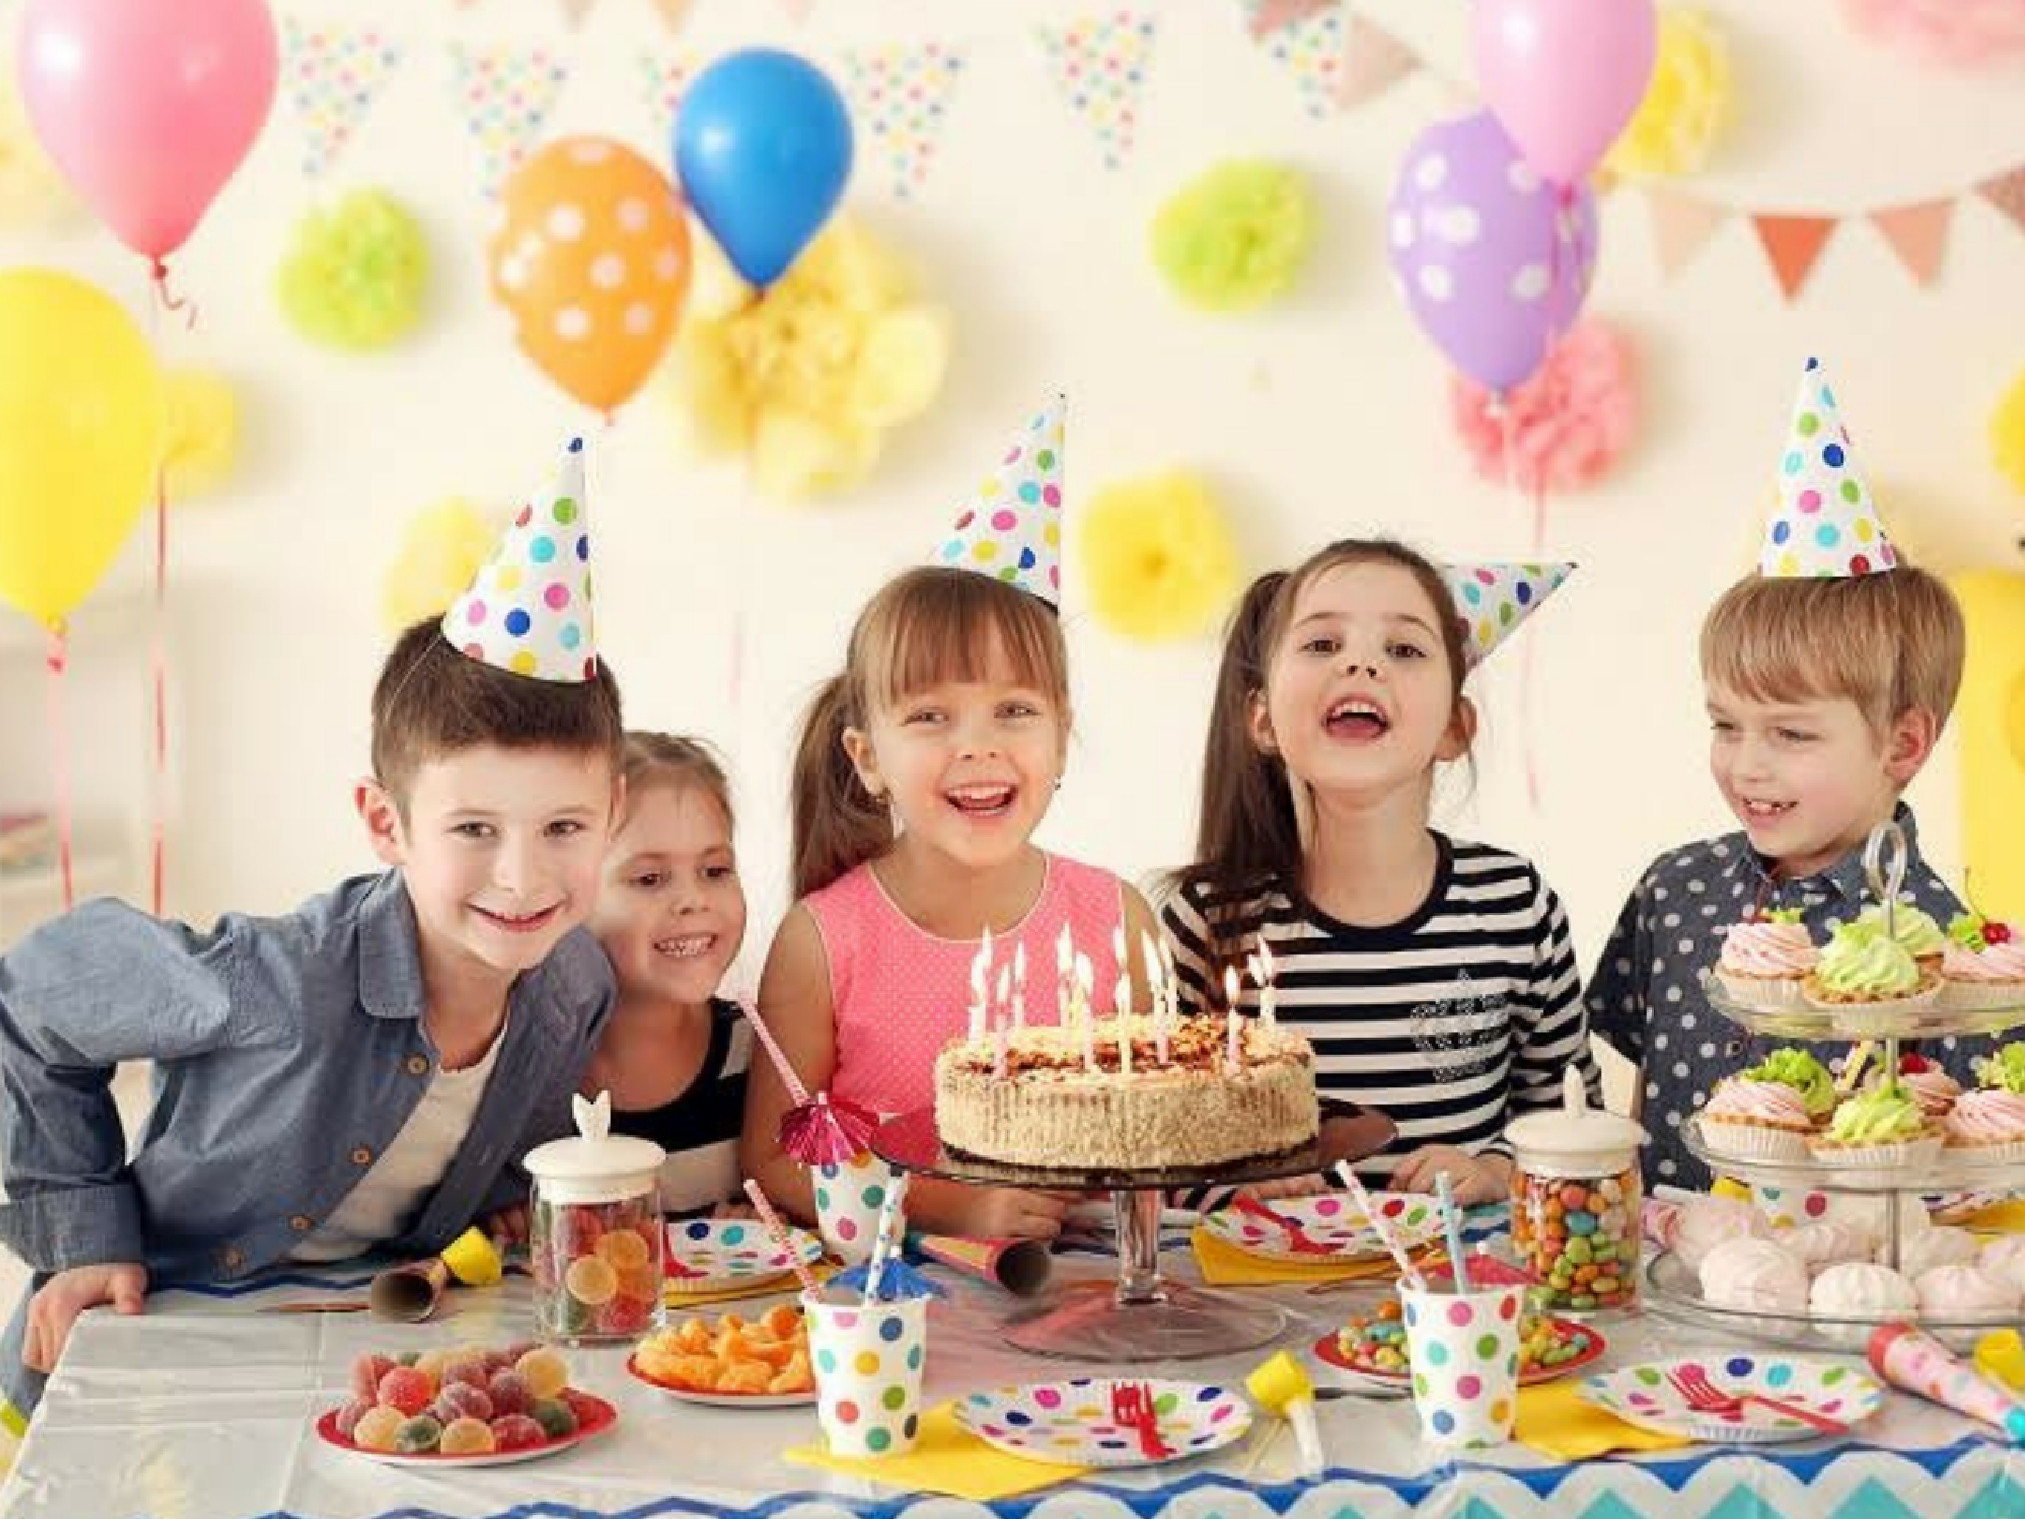 12 Year Old Boy Birthday Party Ideas At Home
 How to Throw a Memorable Birthday Party for Your Kid